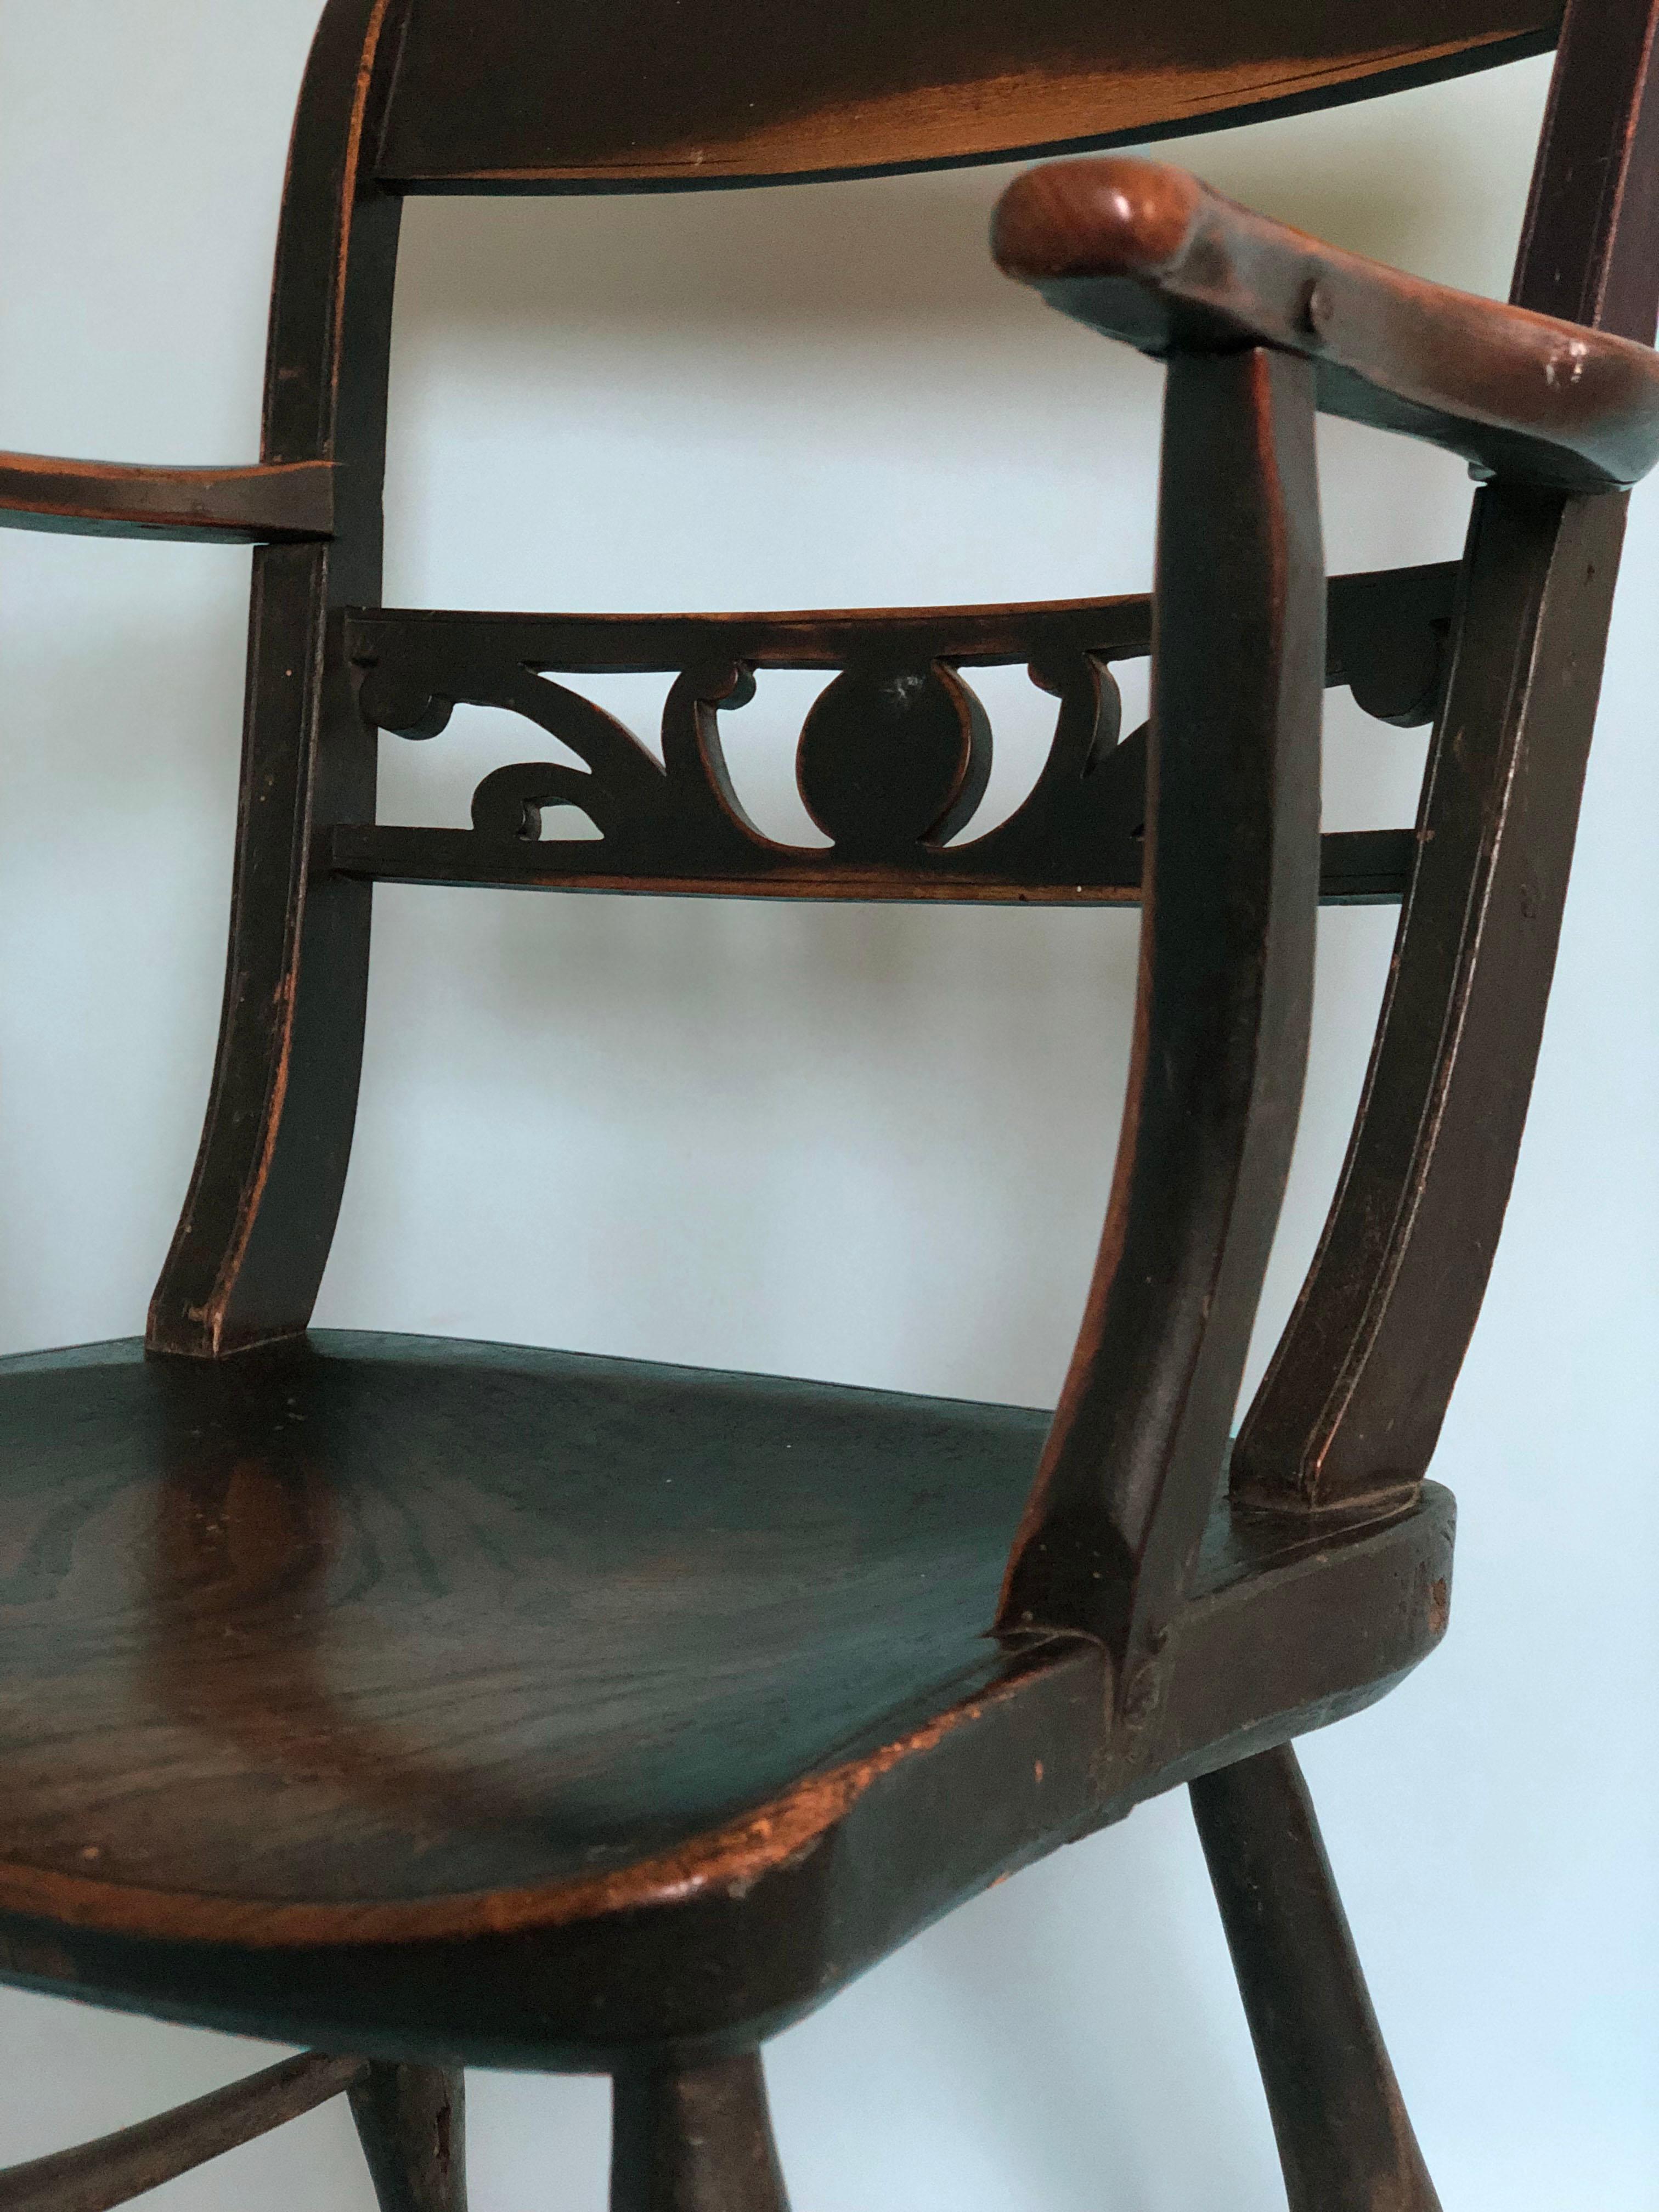 A very old and beautifully weathered Geogian chair from England, early 19th century. Handmade and carved chair that is painted black. The sturdy chair is in good condition and reinforced in the early 20th century.



Object: Chair
Design: